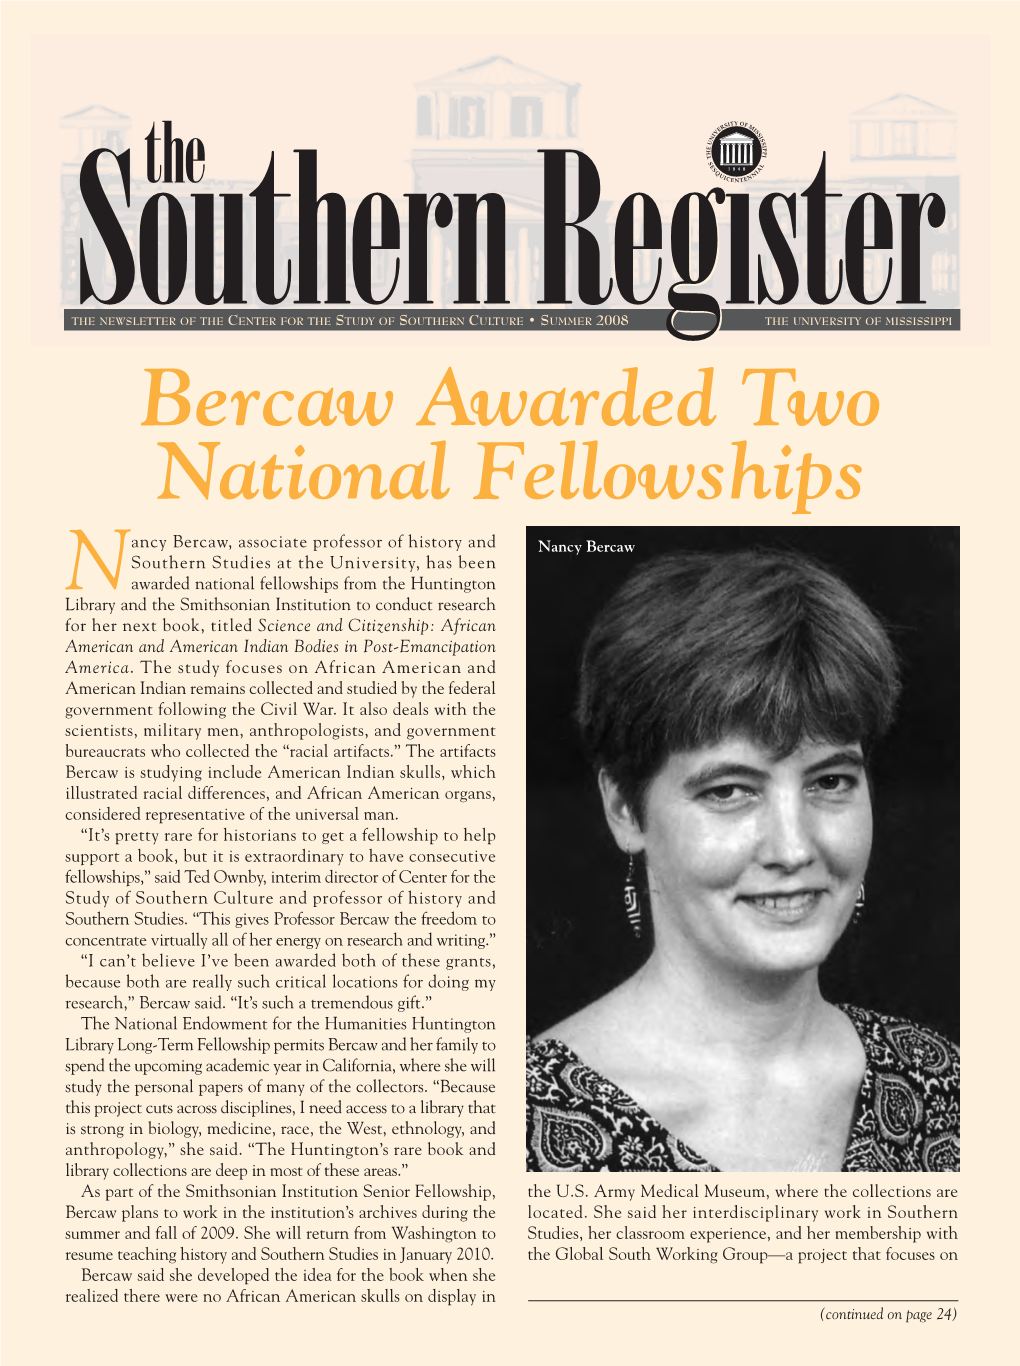 Bercaw Awarded Two National Fellowships